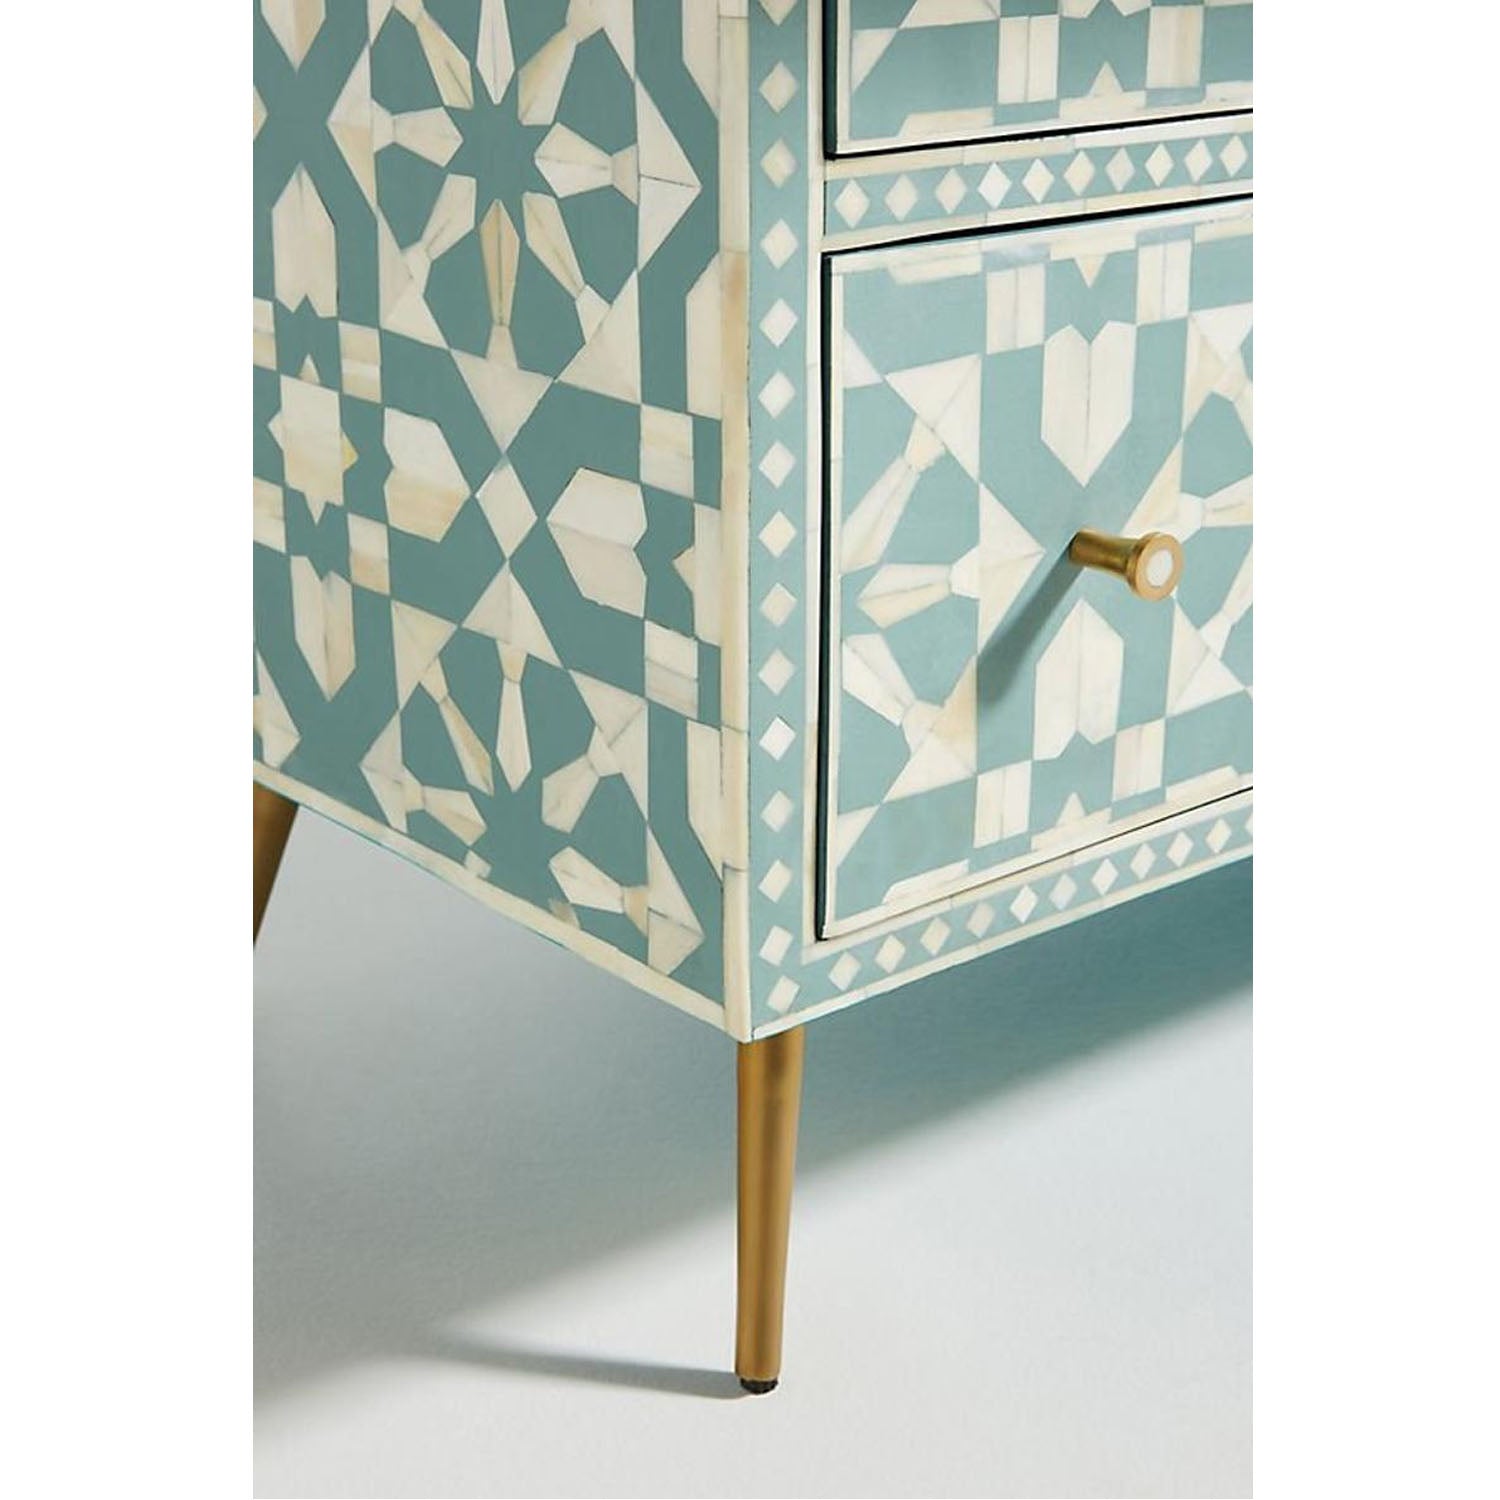 Bone Inlay Moroccan Design 6 Drawers Chest of Drawers Green, Bone Inlay Moroccan Design 6 Drawers Dresser Table, Storage Unit - Notbrand